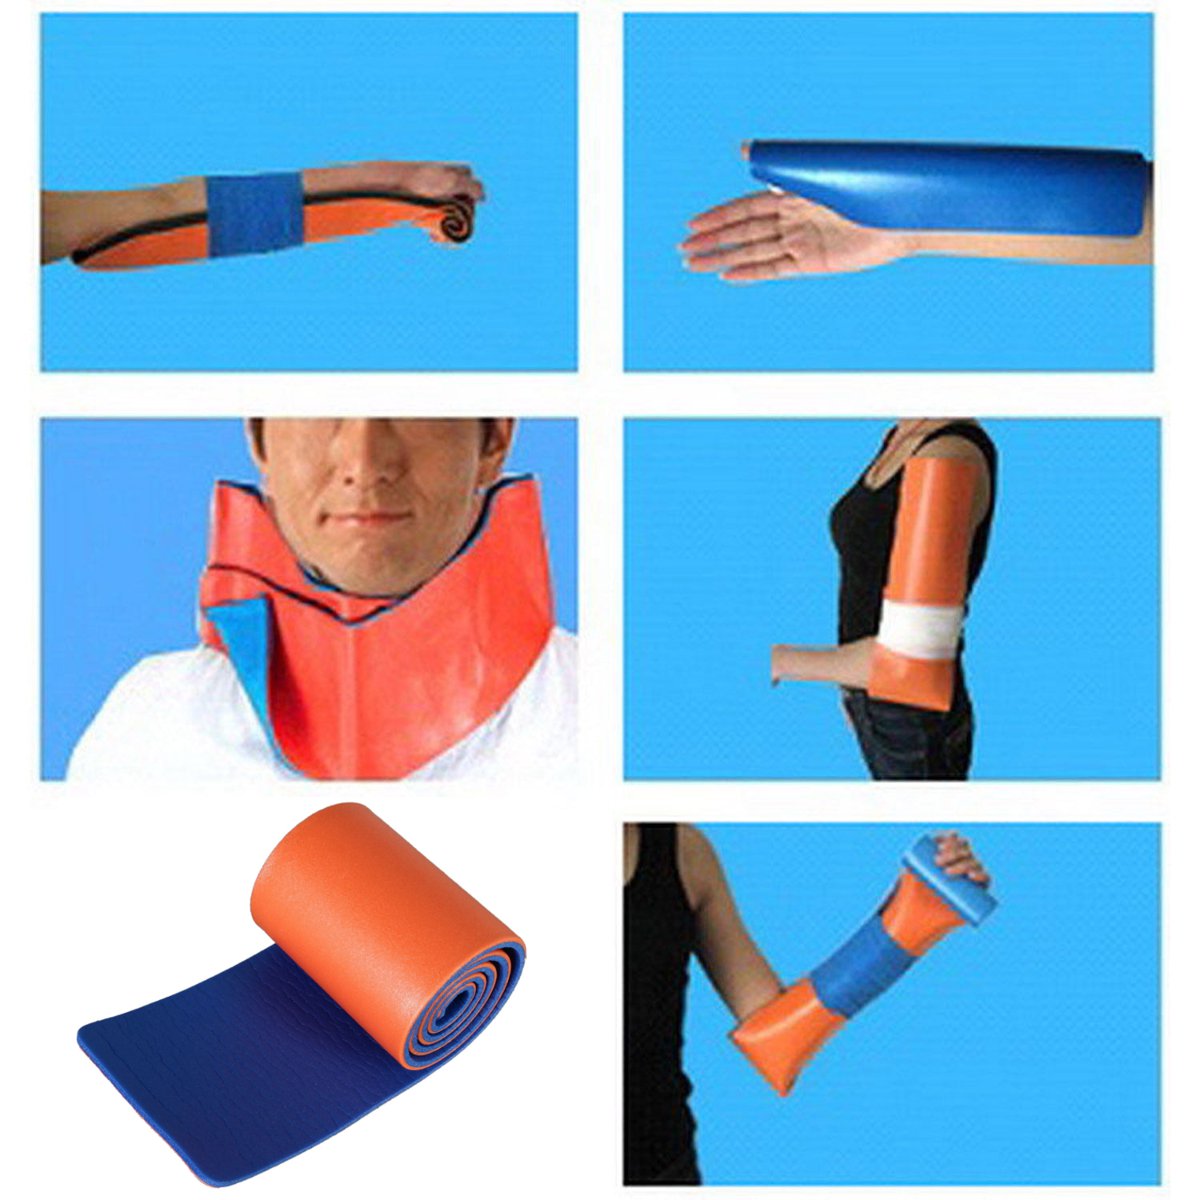 Bone-Medical-First-Aid-Roll-Splint-Leg-Support-Wrist-Fixed-Fracture-Protect-Corrector-1261070